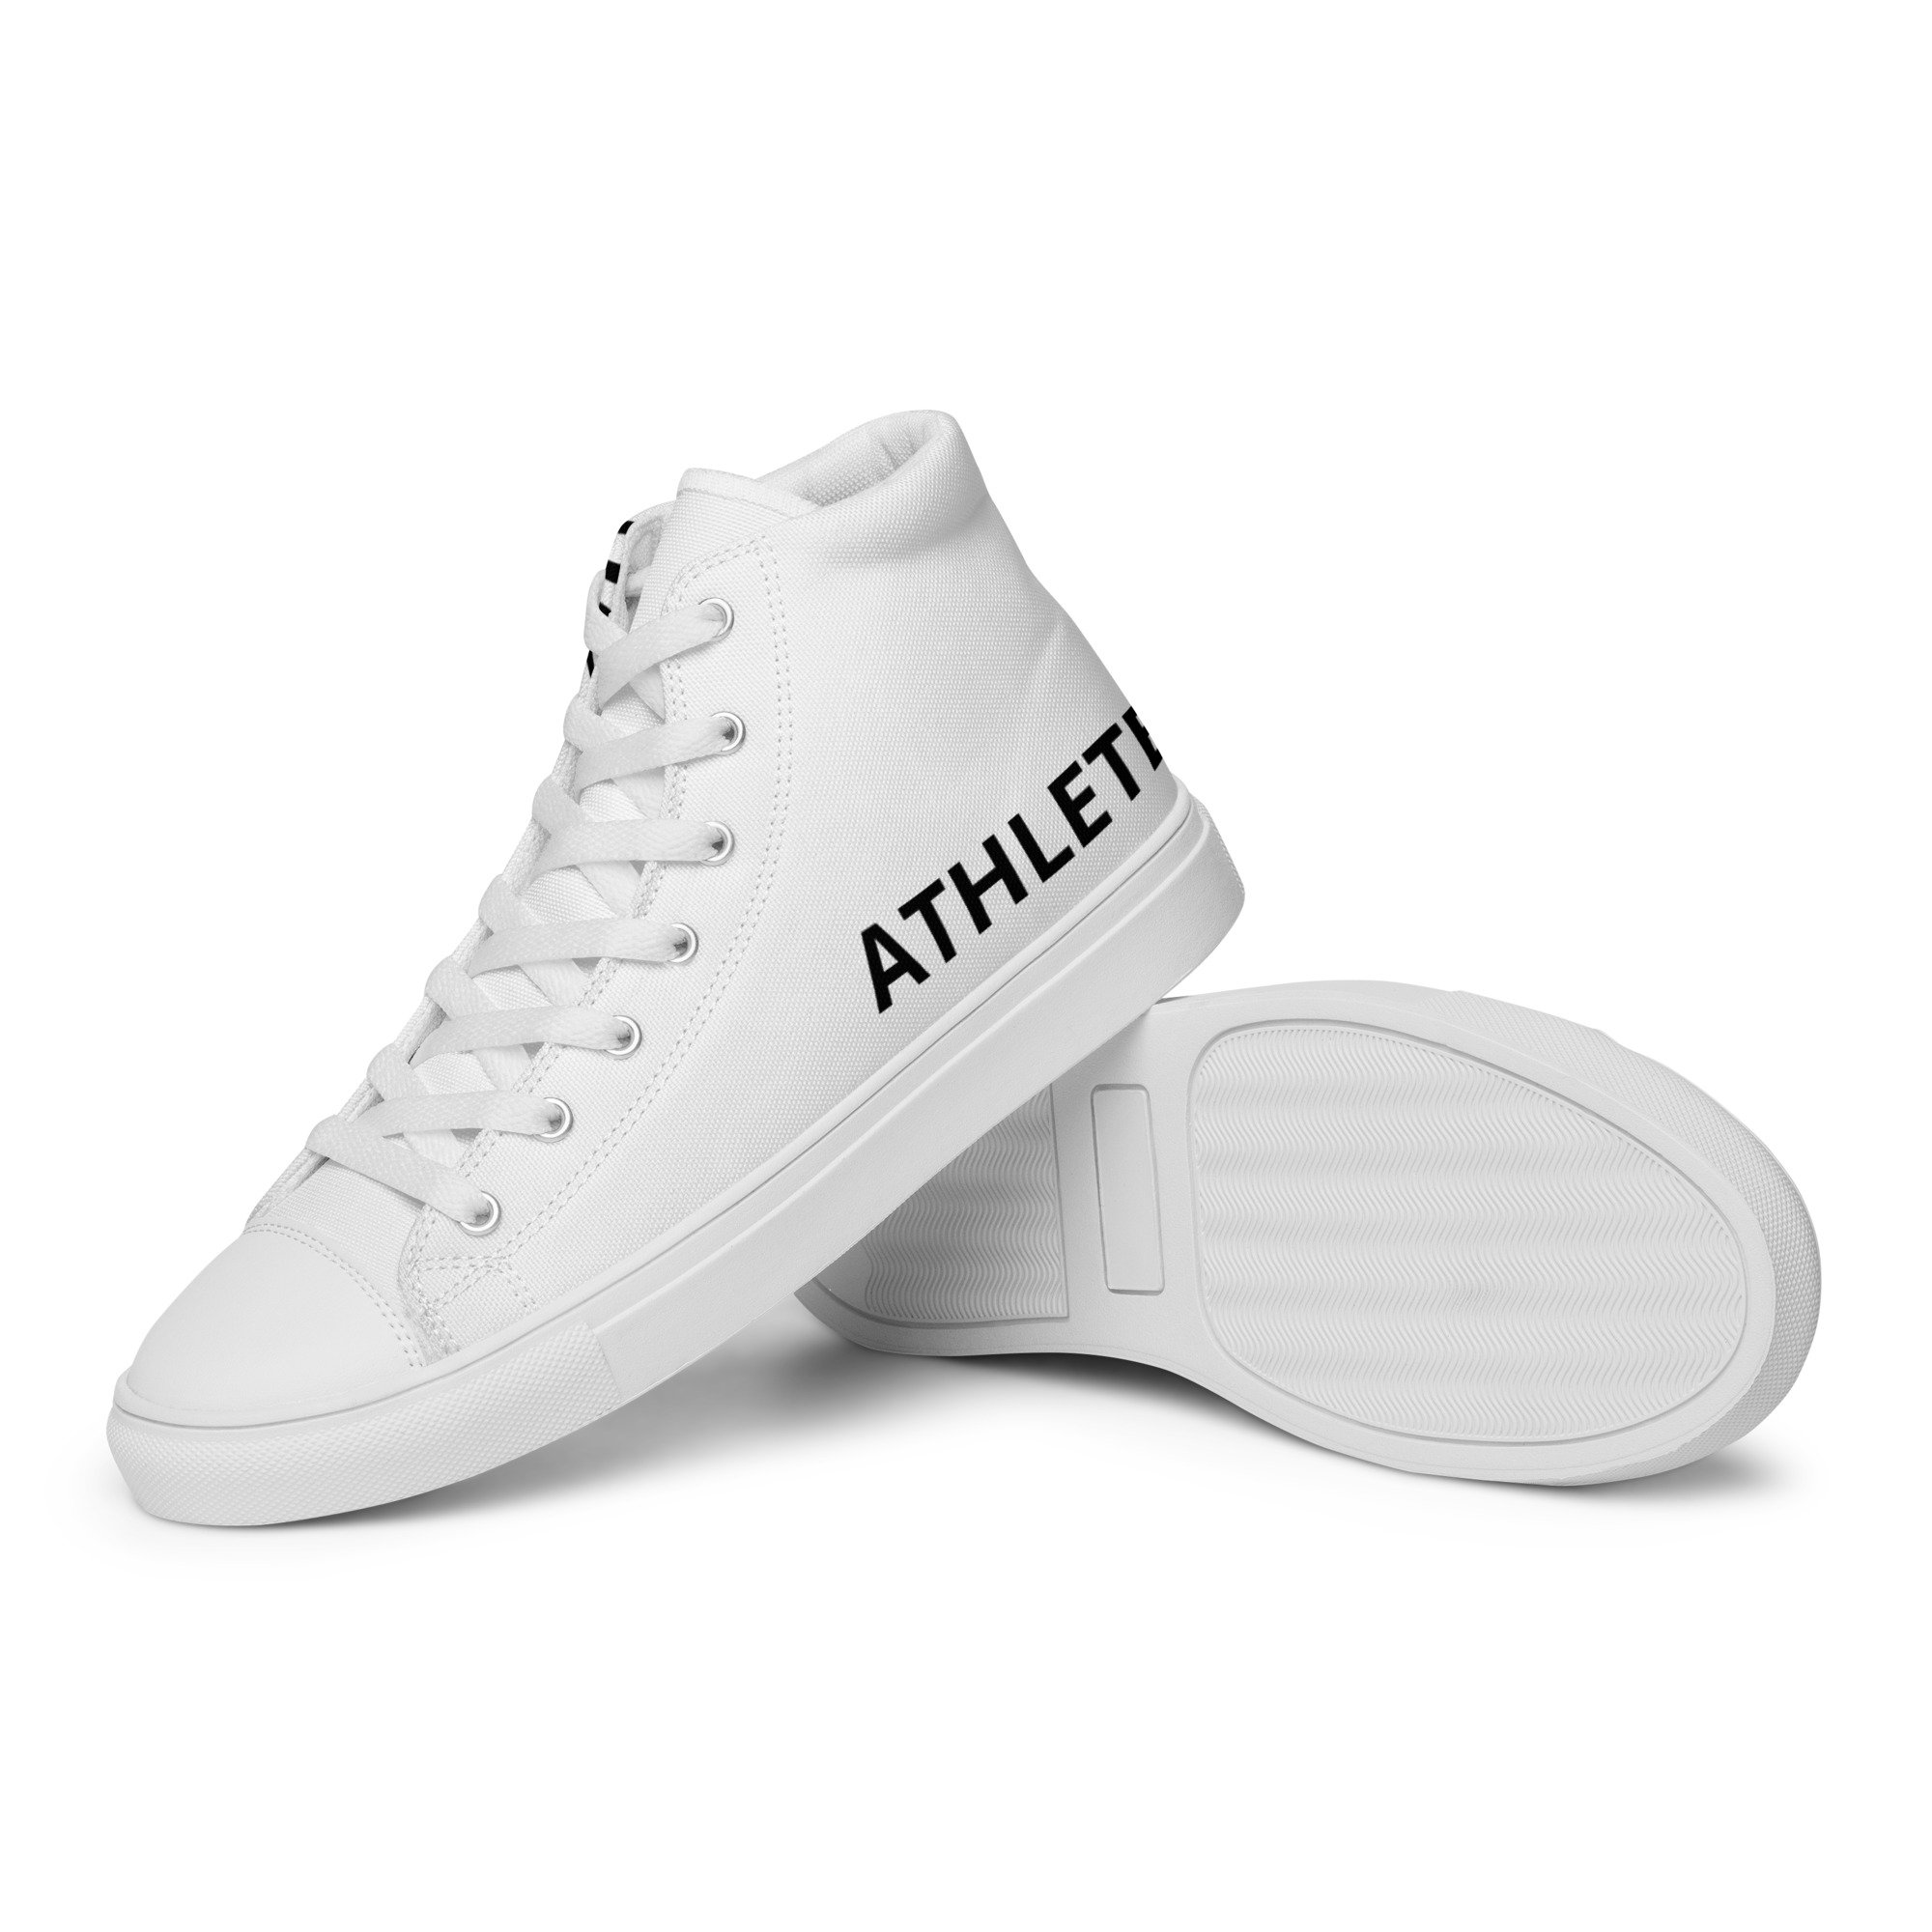 The Best White Sneakers by Nike. Nike.com